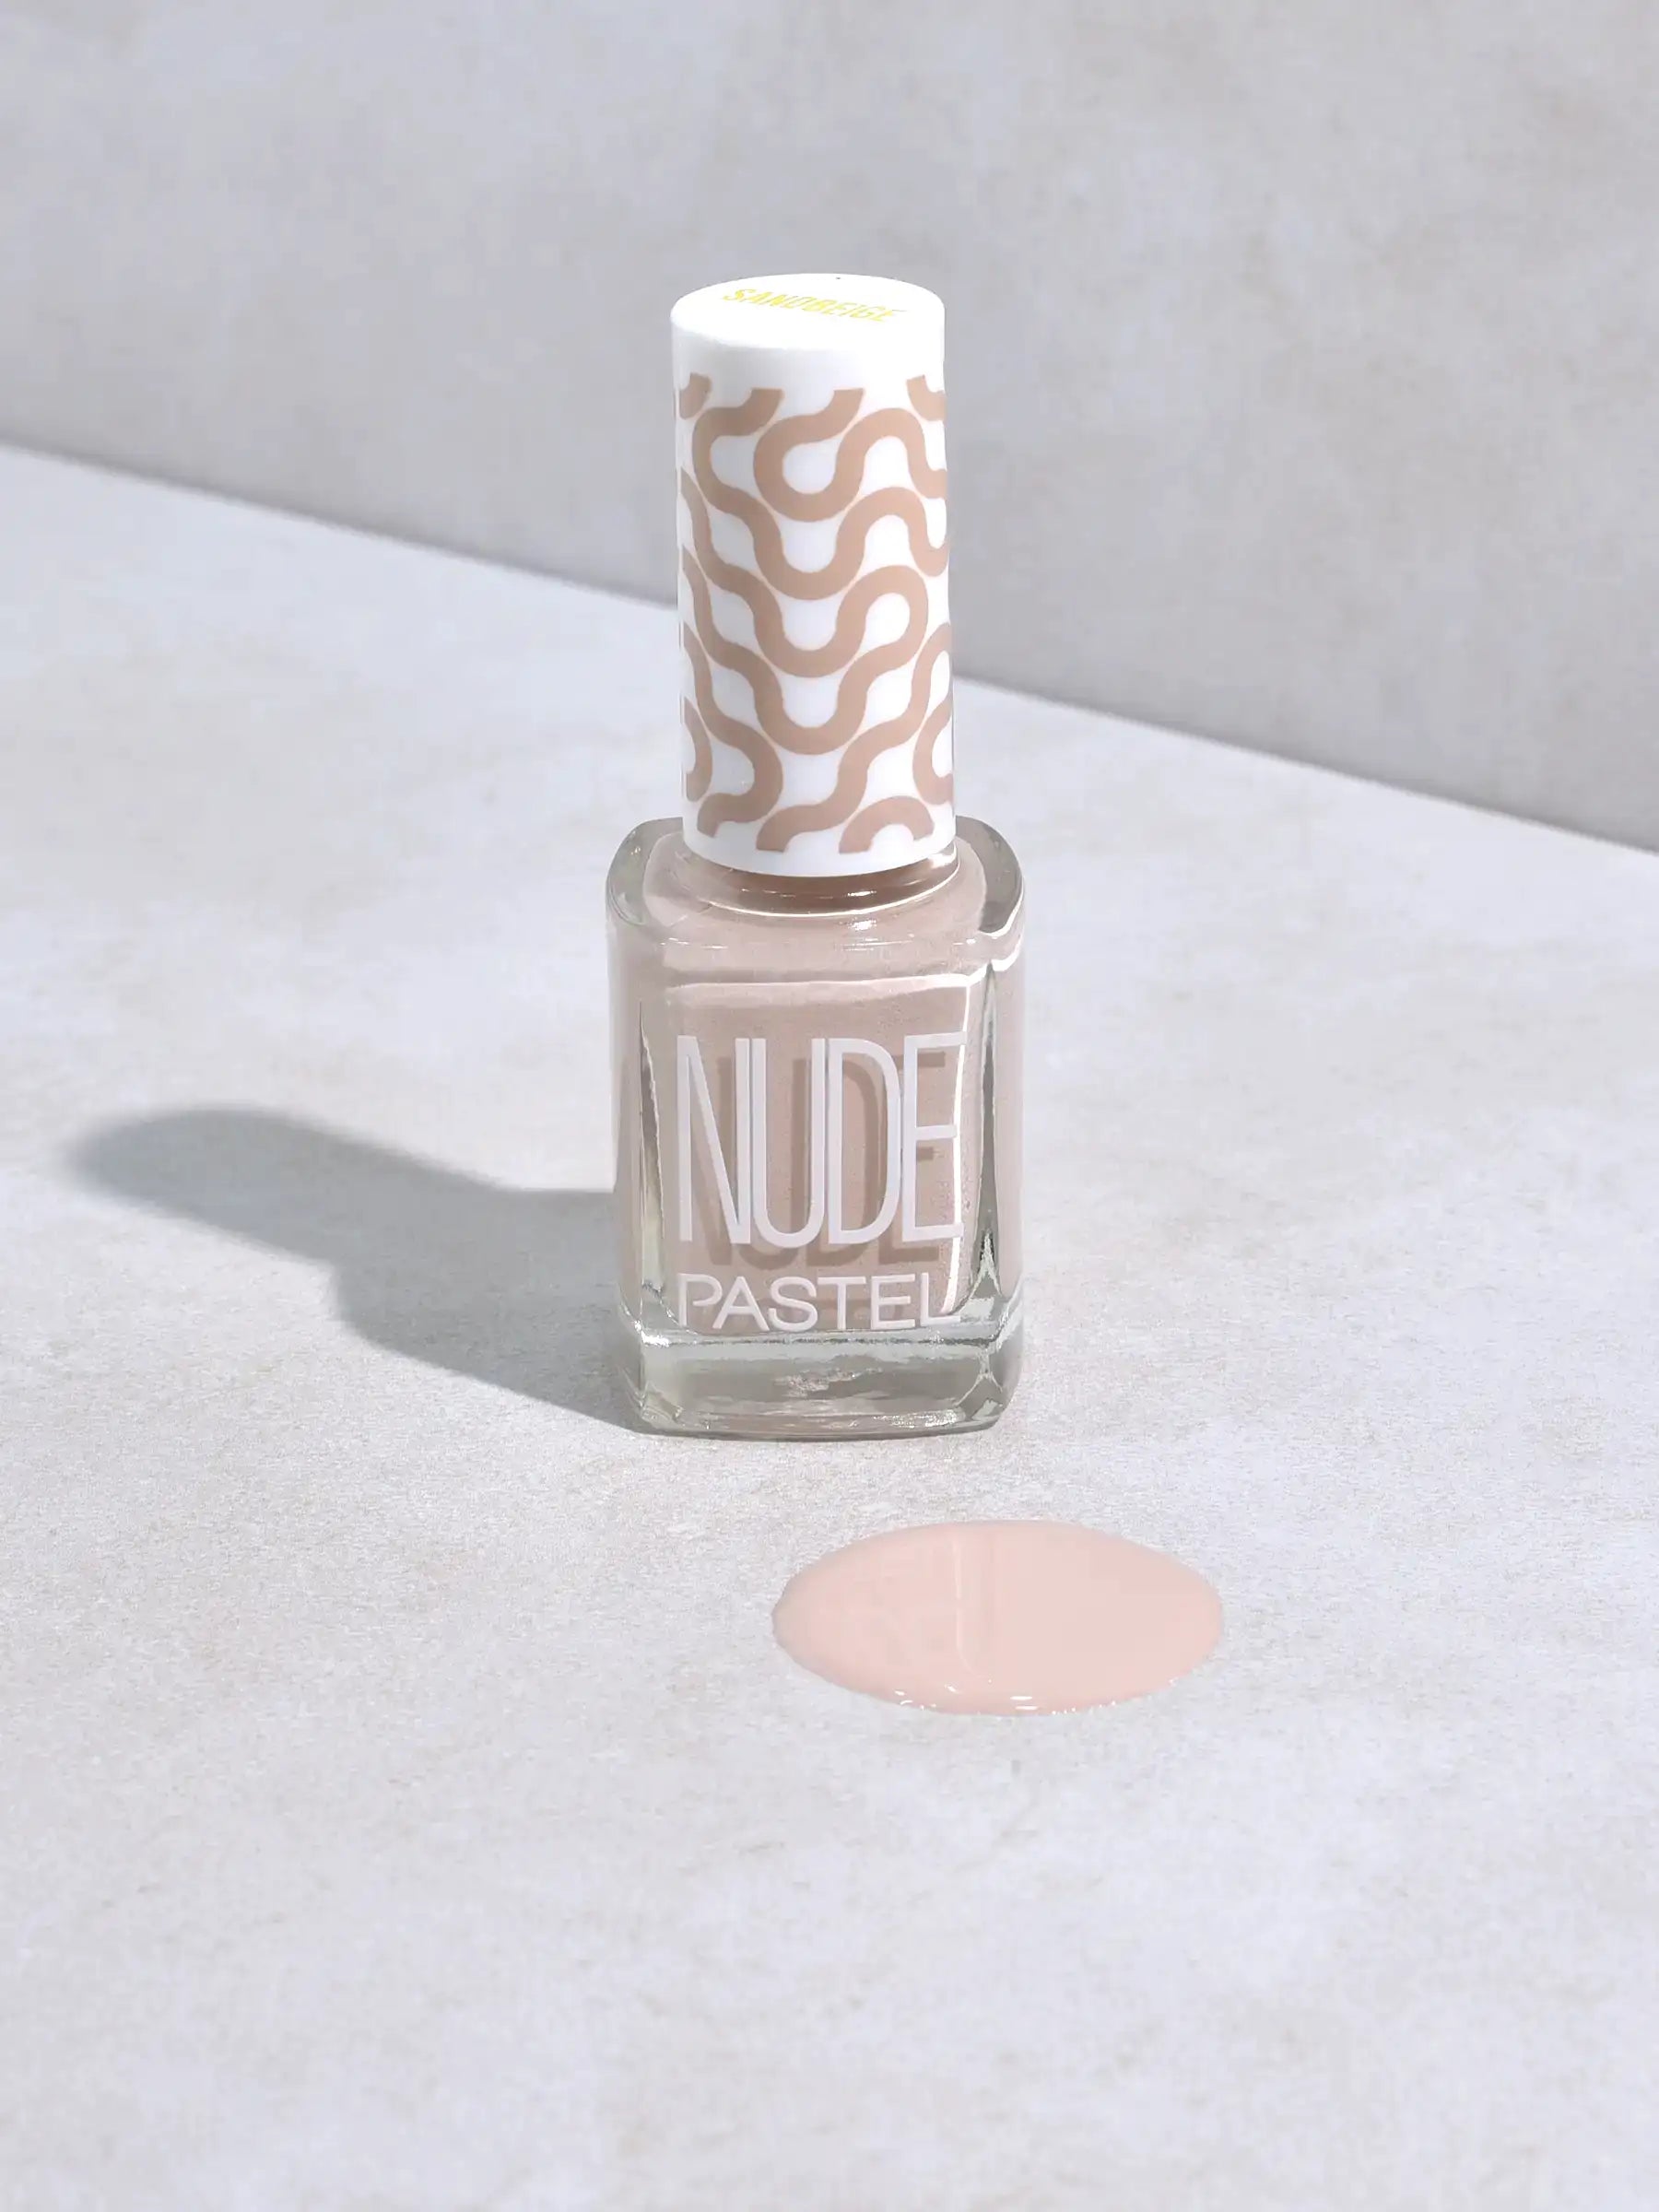 NUDE BY PASTEL NAIL POLISH 766 SAND BEIGE